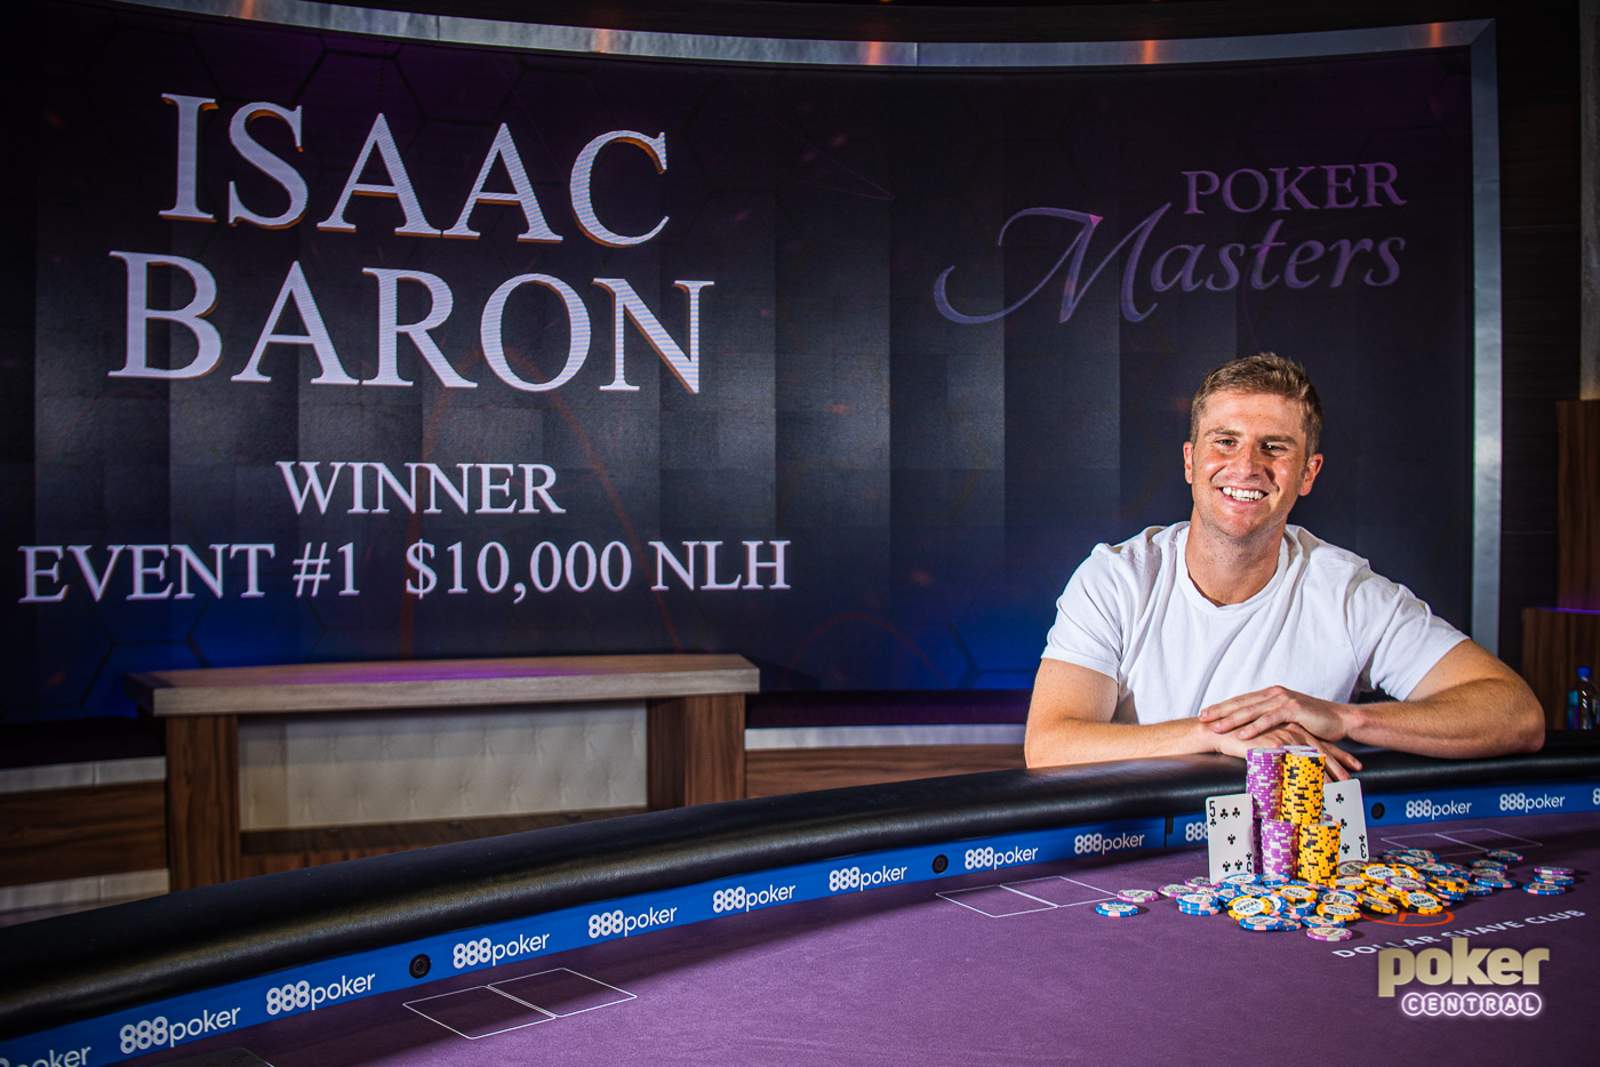 Isaac Baron Wins 2019 Poker Masters Event #1